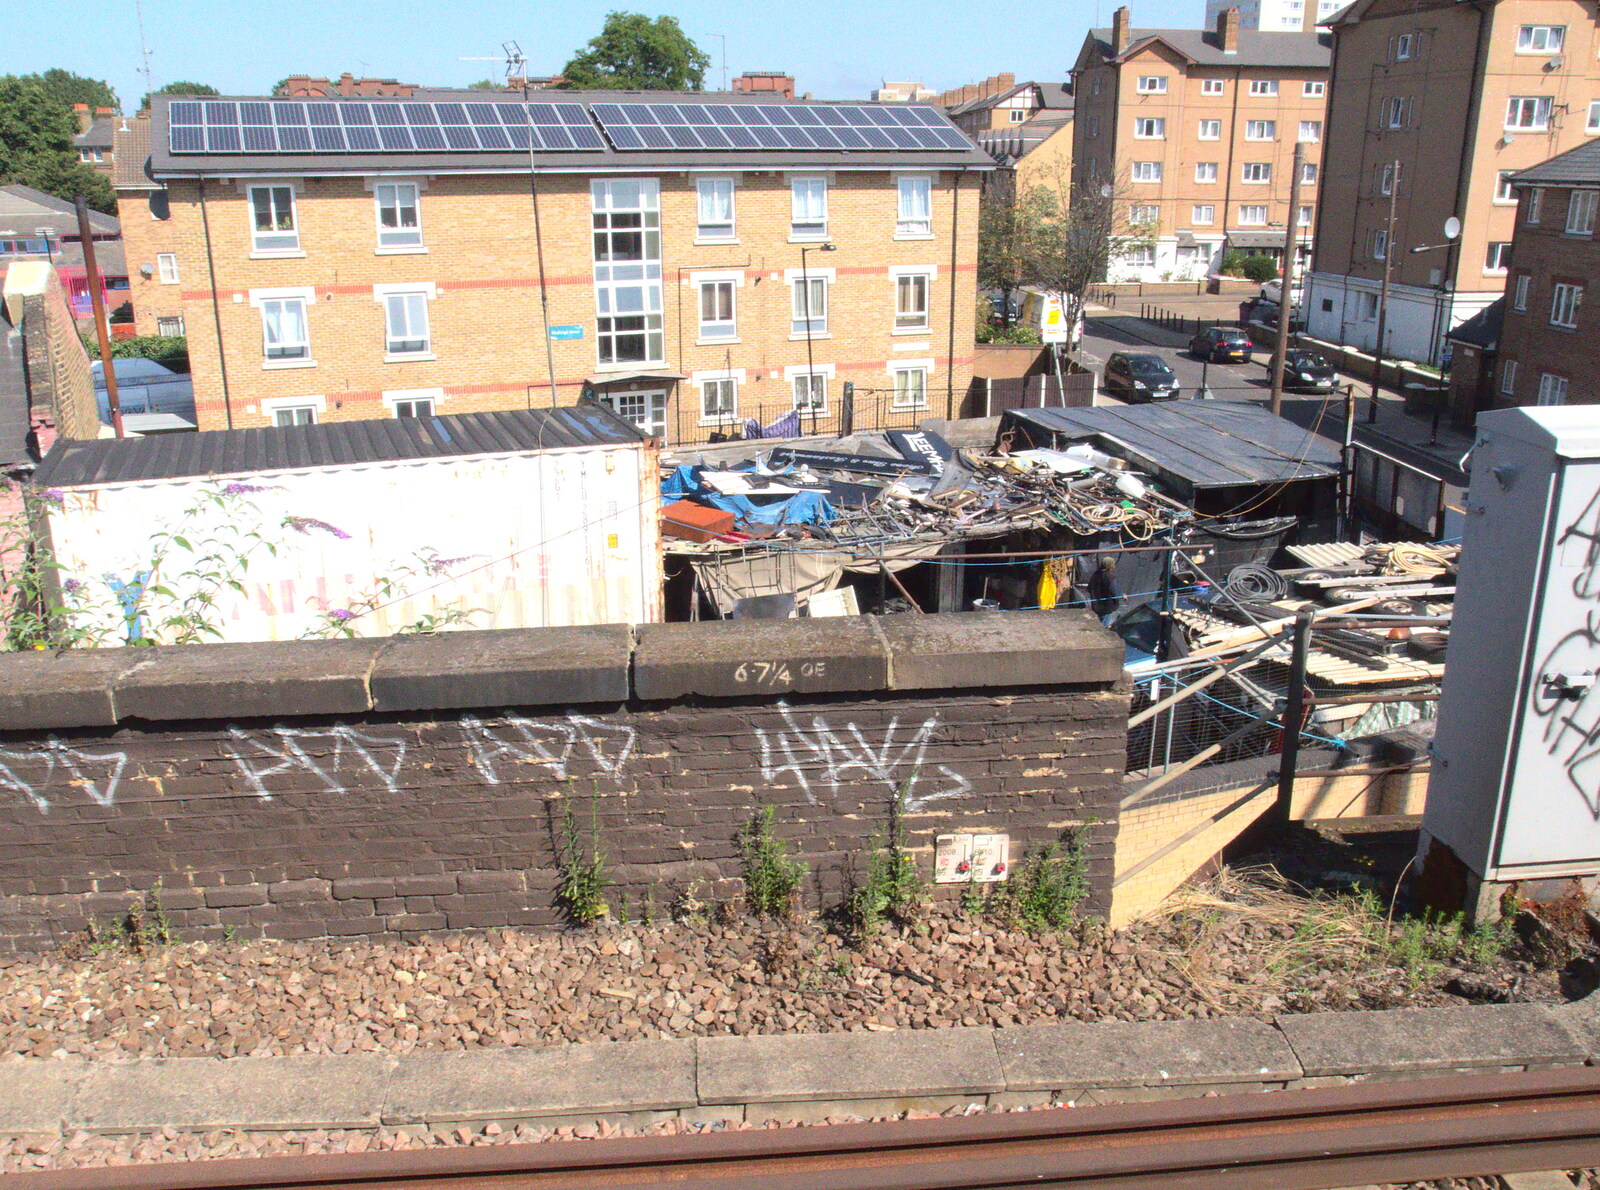 A scrapyard by the railway from A Week on the Rails, Stratford and Liverpool Street, London - 23rd July